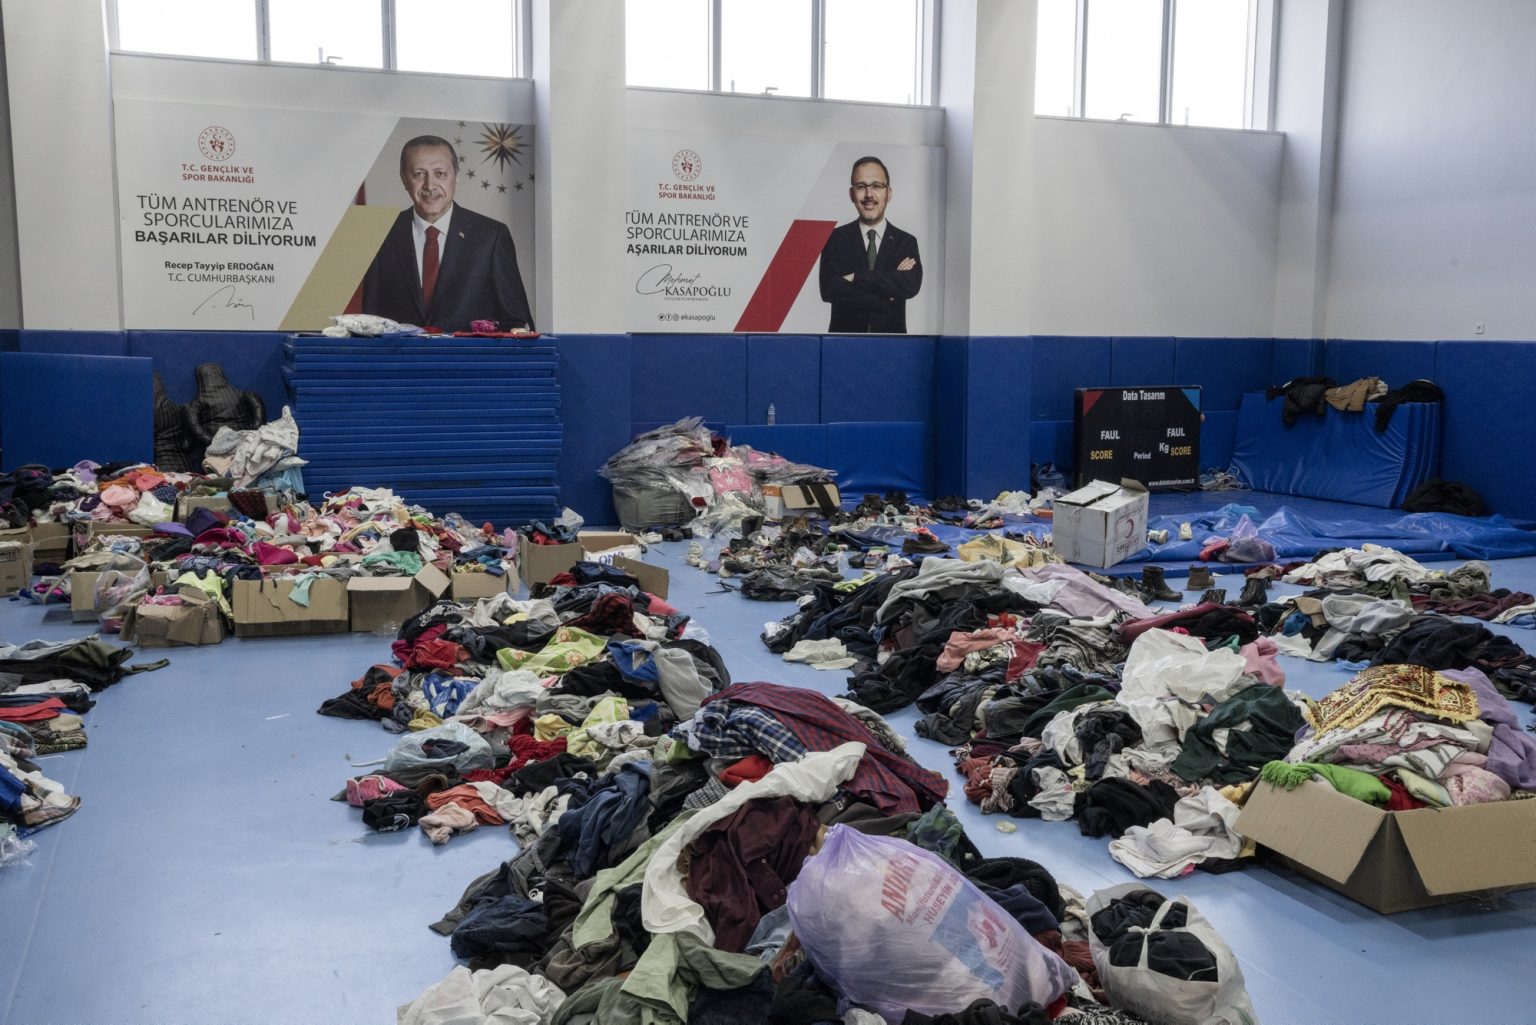 Osmaniye, Turkey, February 2023 - The aftermath of the earthquake that hit southern Turkey and northern Syria.    Rows of clothing were prepared inside the sports hall for distribution to the civilian population. ><
Osmaniye, Turchia, febbraio 2023  Le conseguenze del terremoto che ha colpito la Turchia del Sud e la Siria del nord.